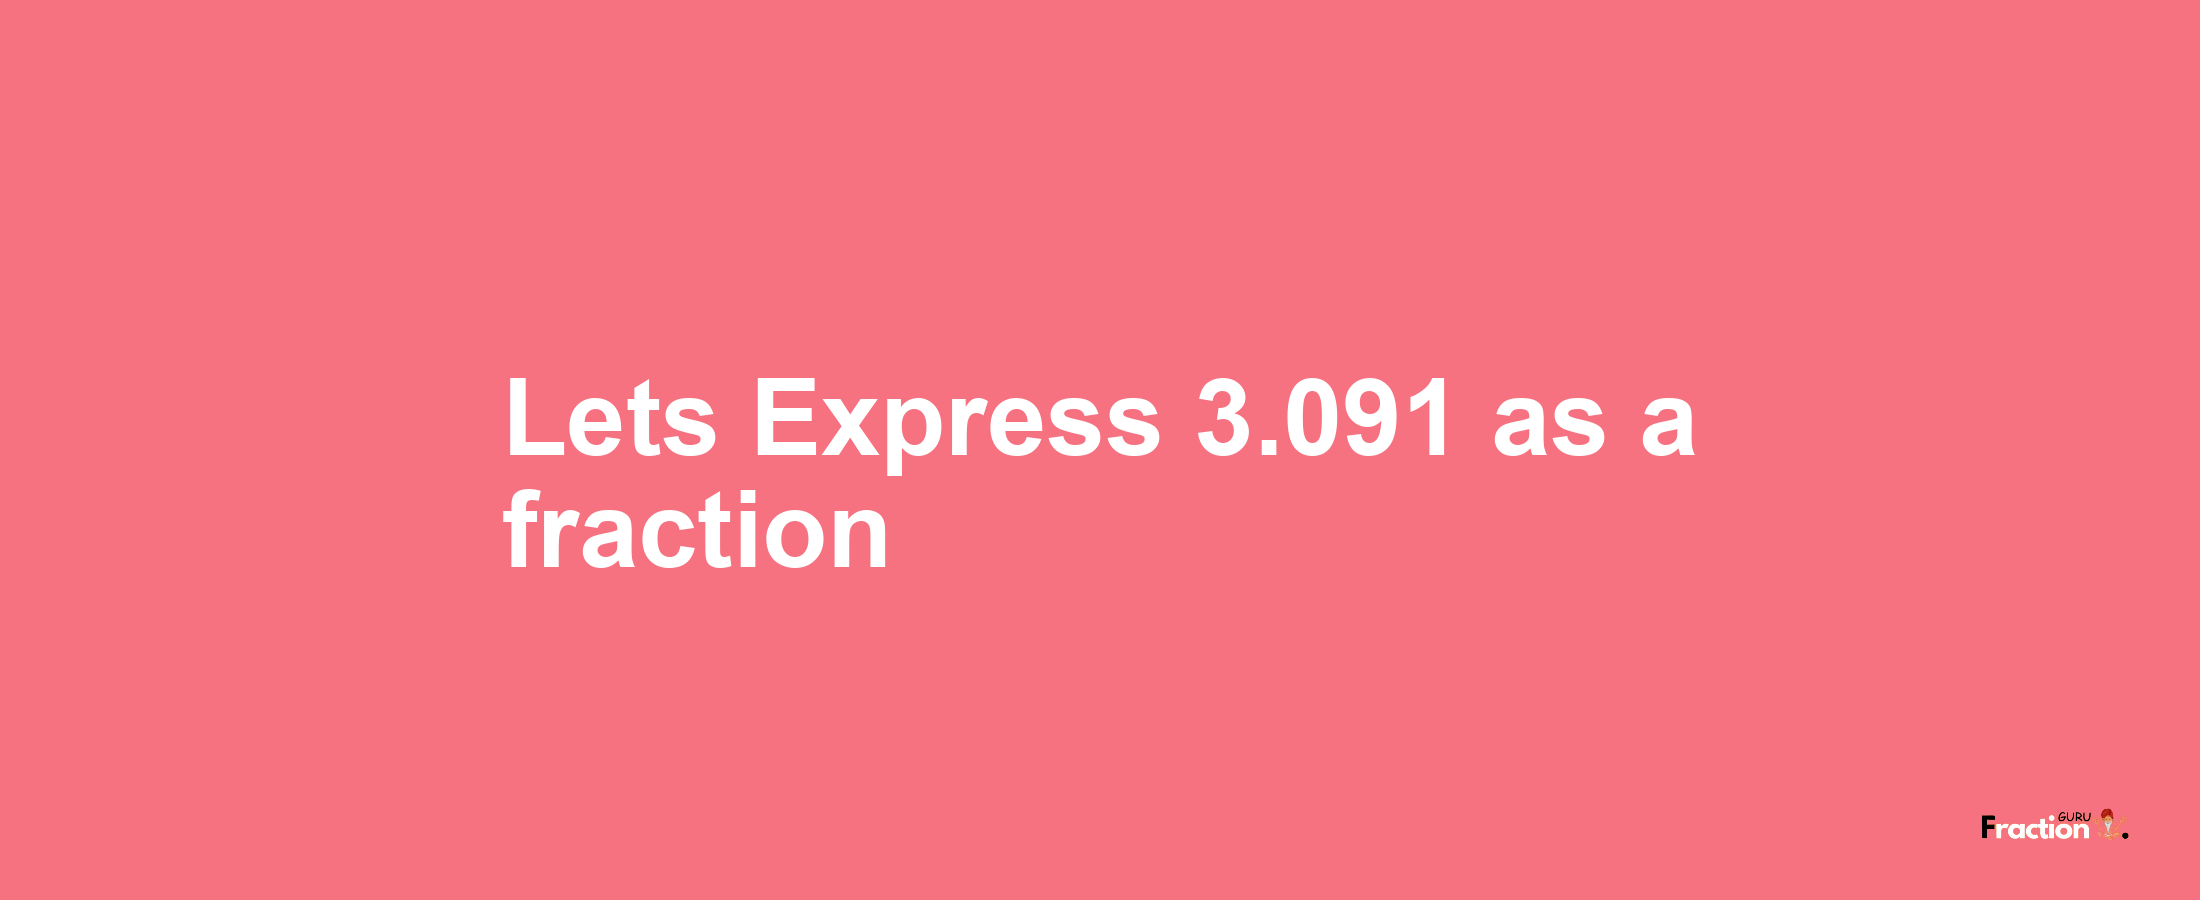 Lets Express 3.091 as afraction